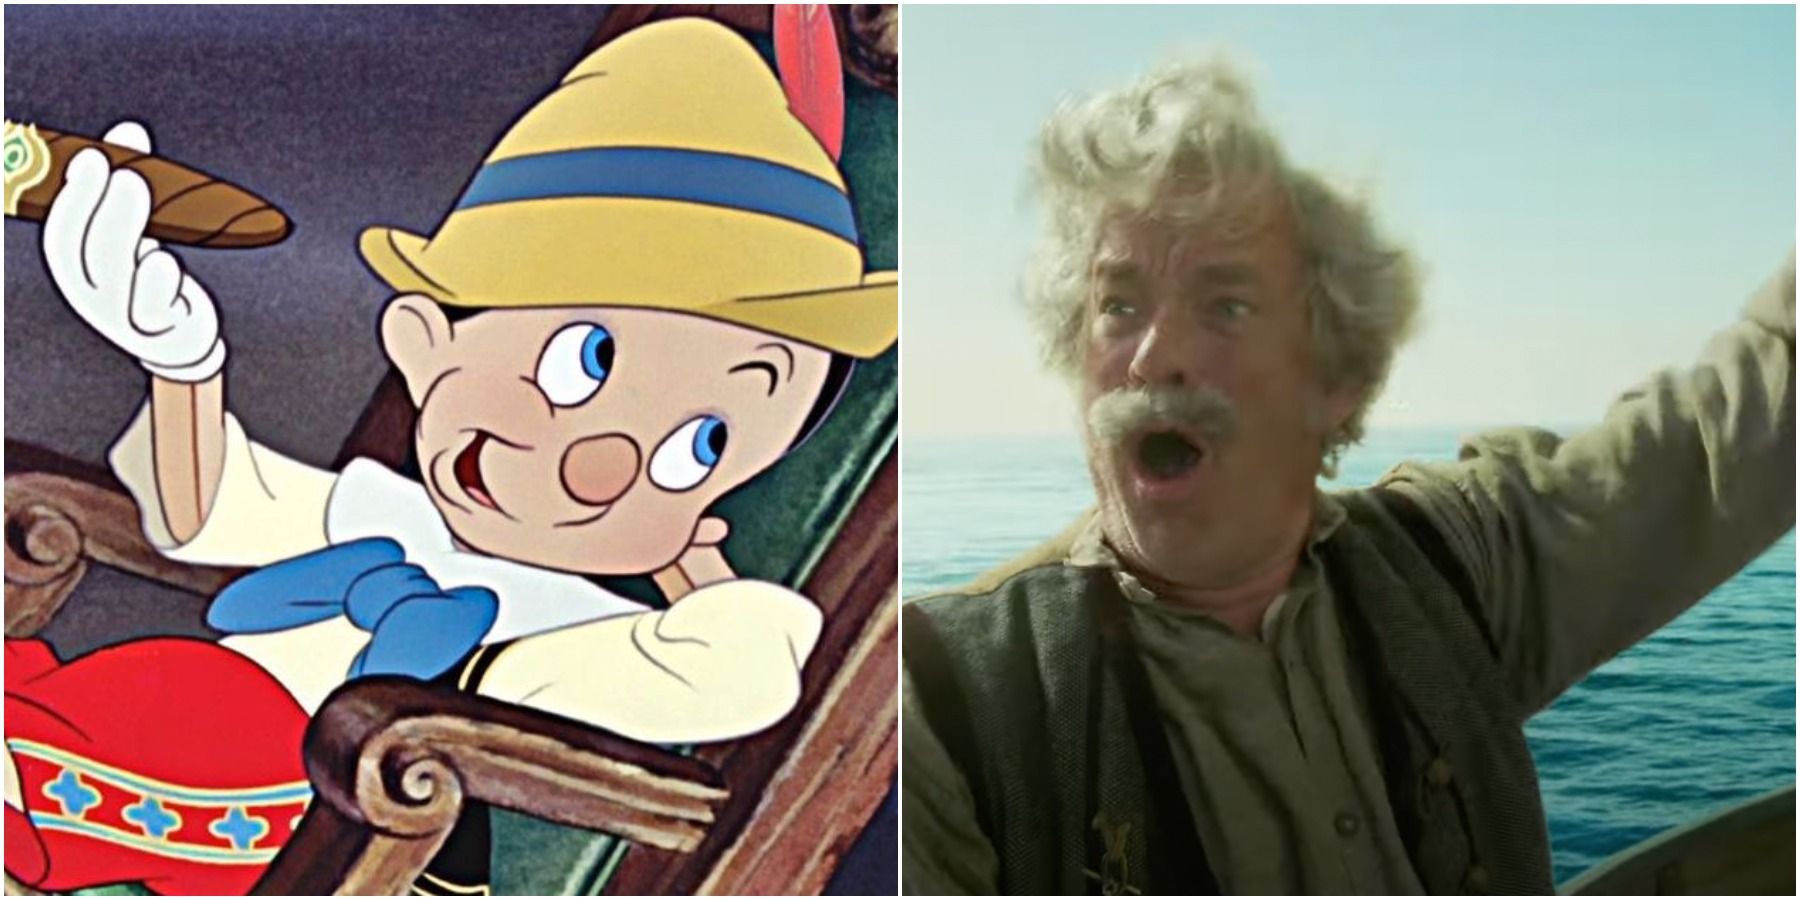 Disney's Pinocchio animated version and live-action movie